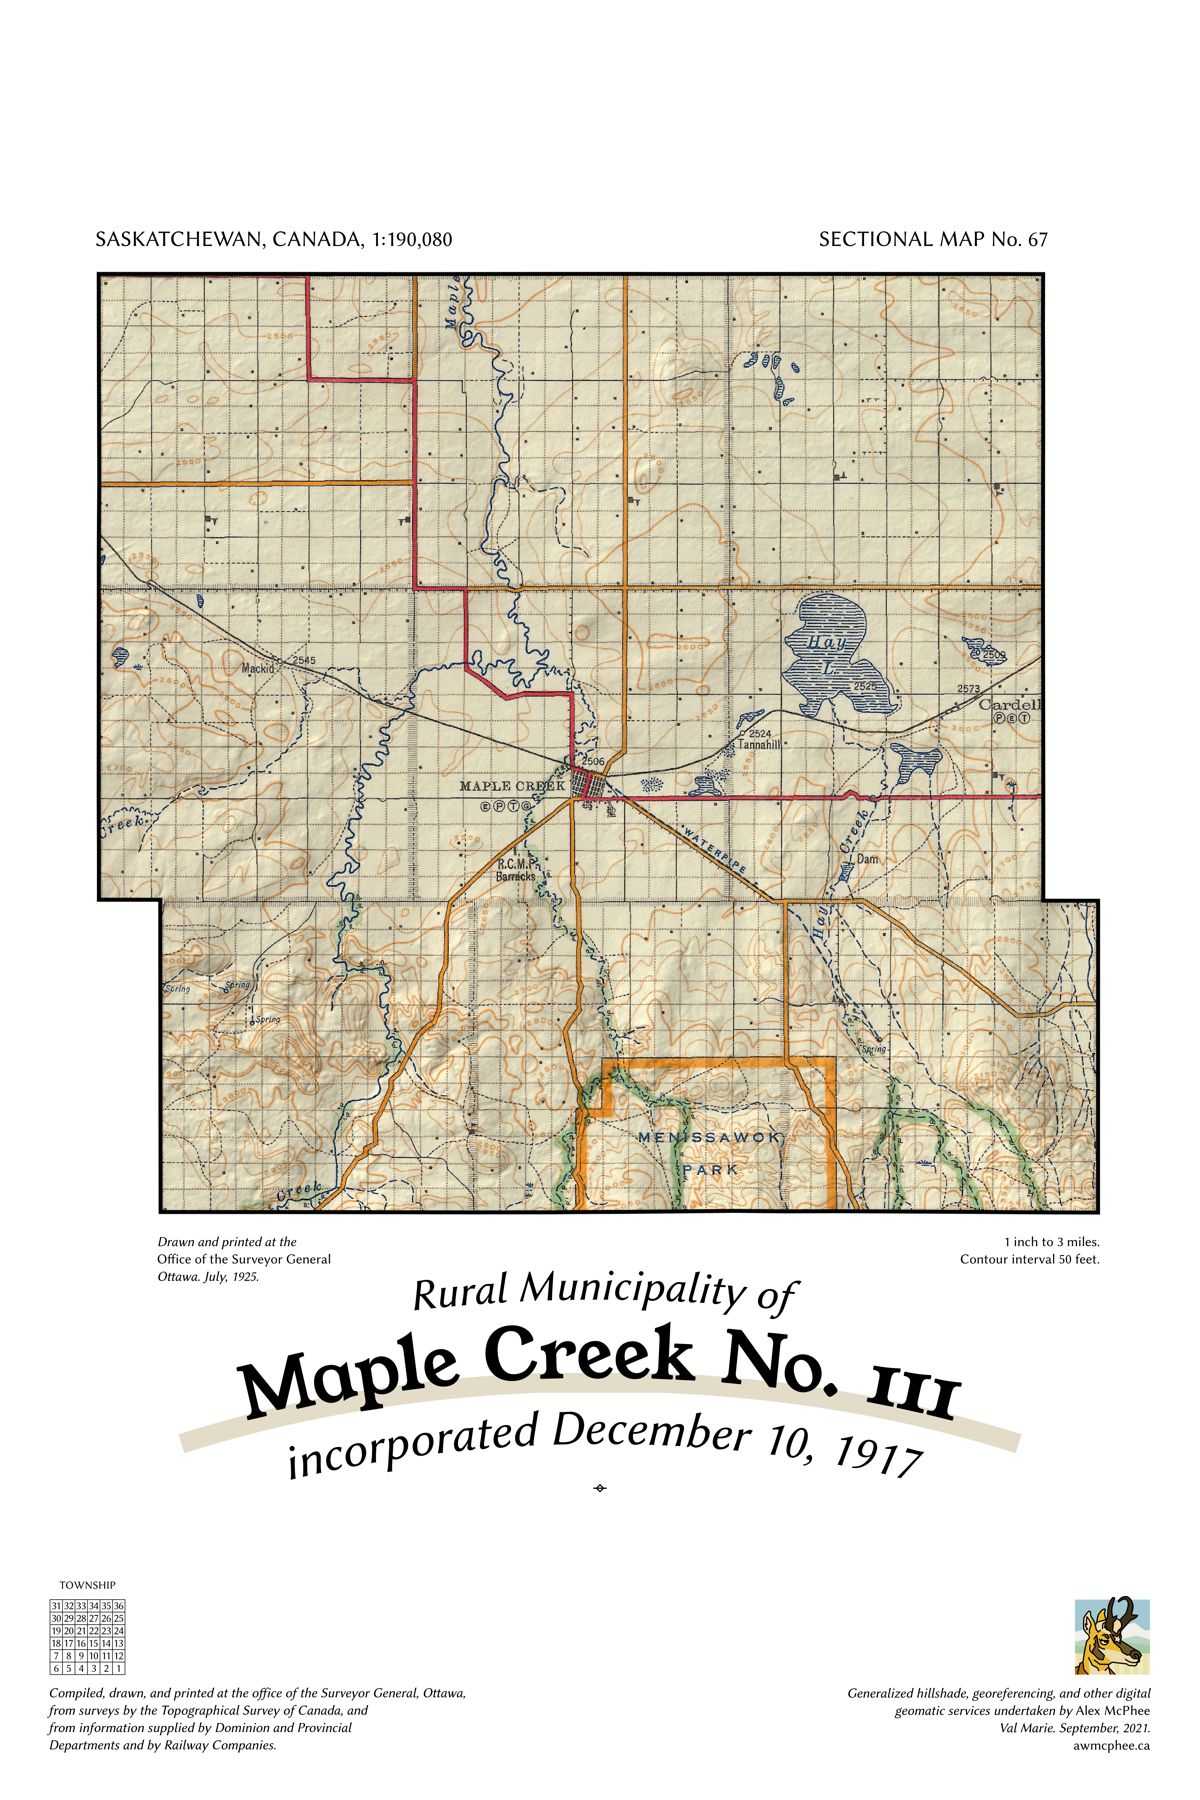 A map of the Rural Municipality of Maple Creek No. 111.